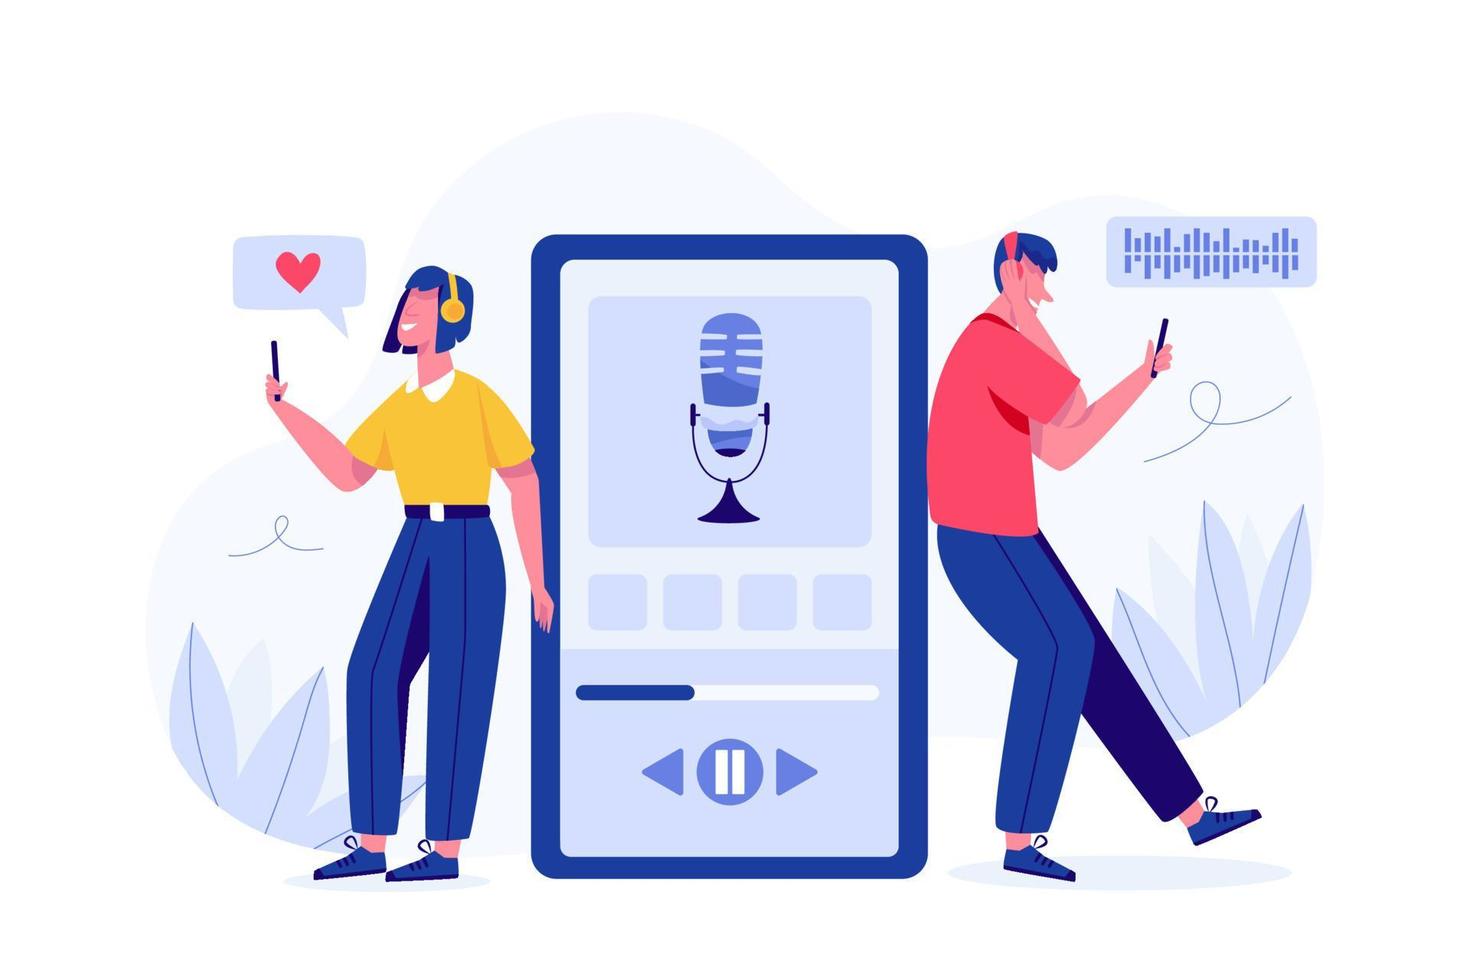 Podcast motivation and inspiration concept. Man and woman listening to audio in headphones, podcast app on smartphone. vector